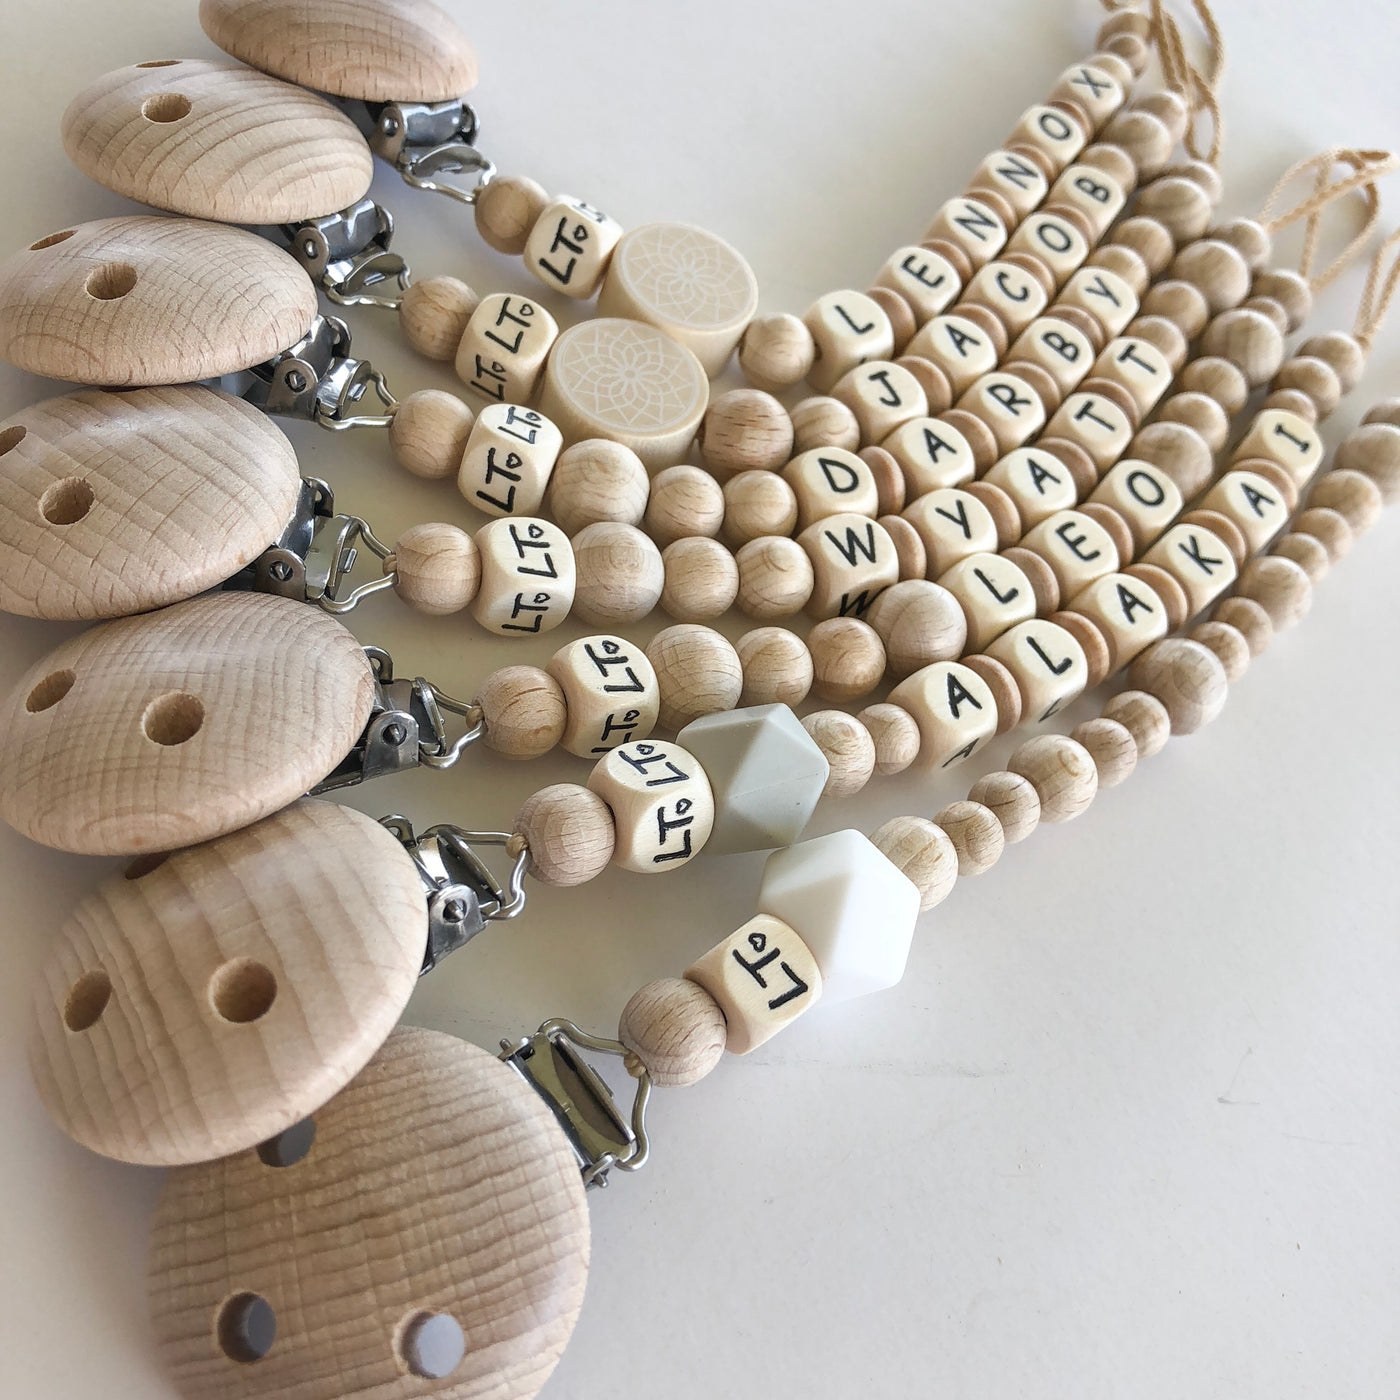 Wooden soother chains